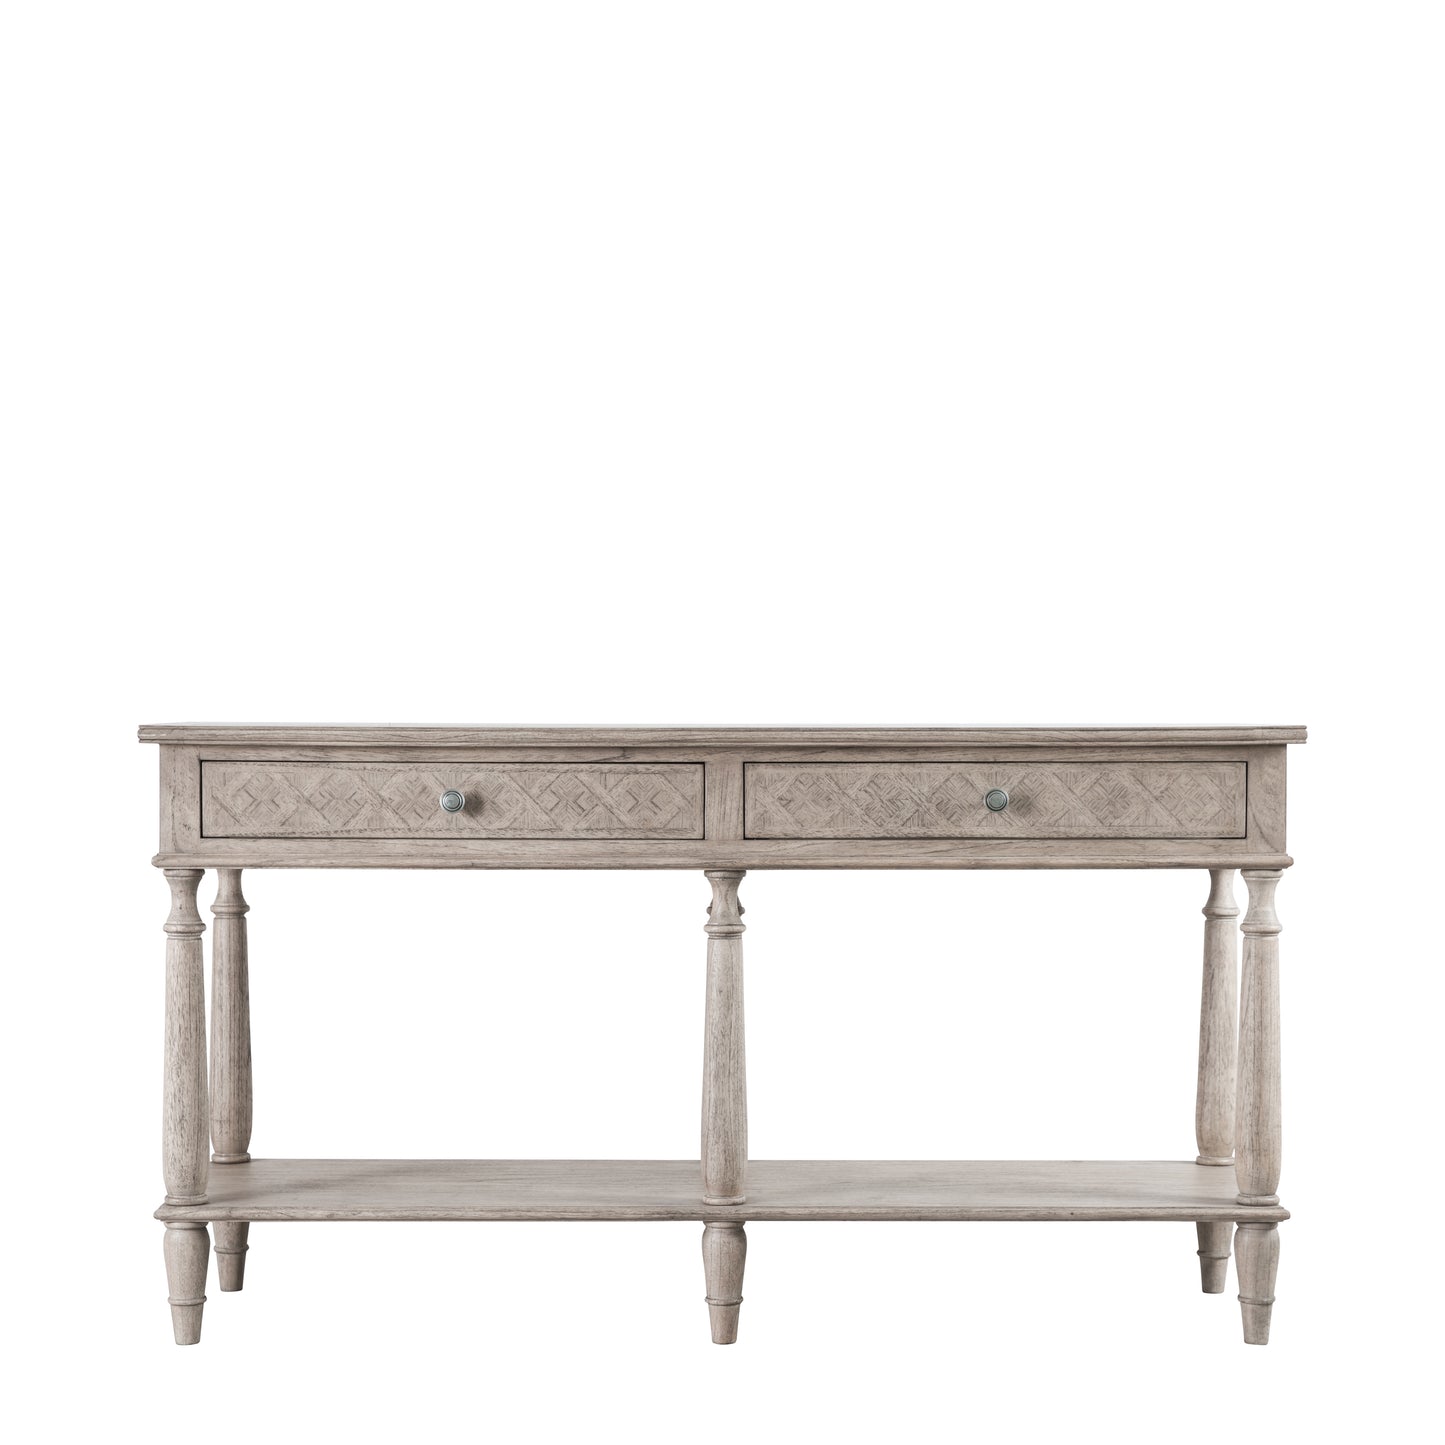 Load image into Gallery viewer, A Belsford 2 Drawer Console Table from Kikiathome.co.uk for interior decor.
